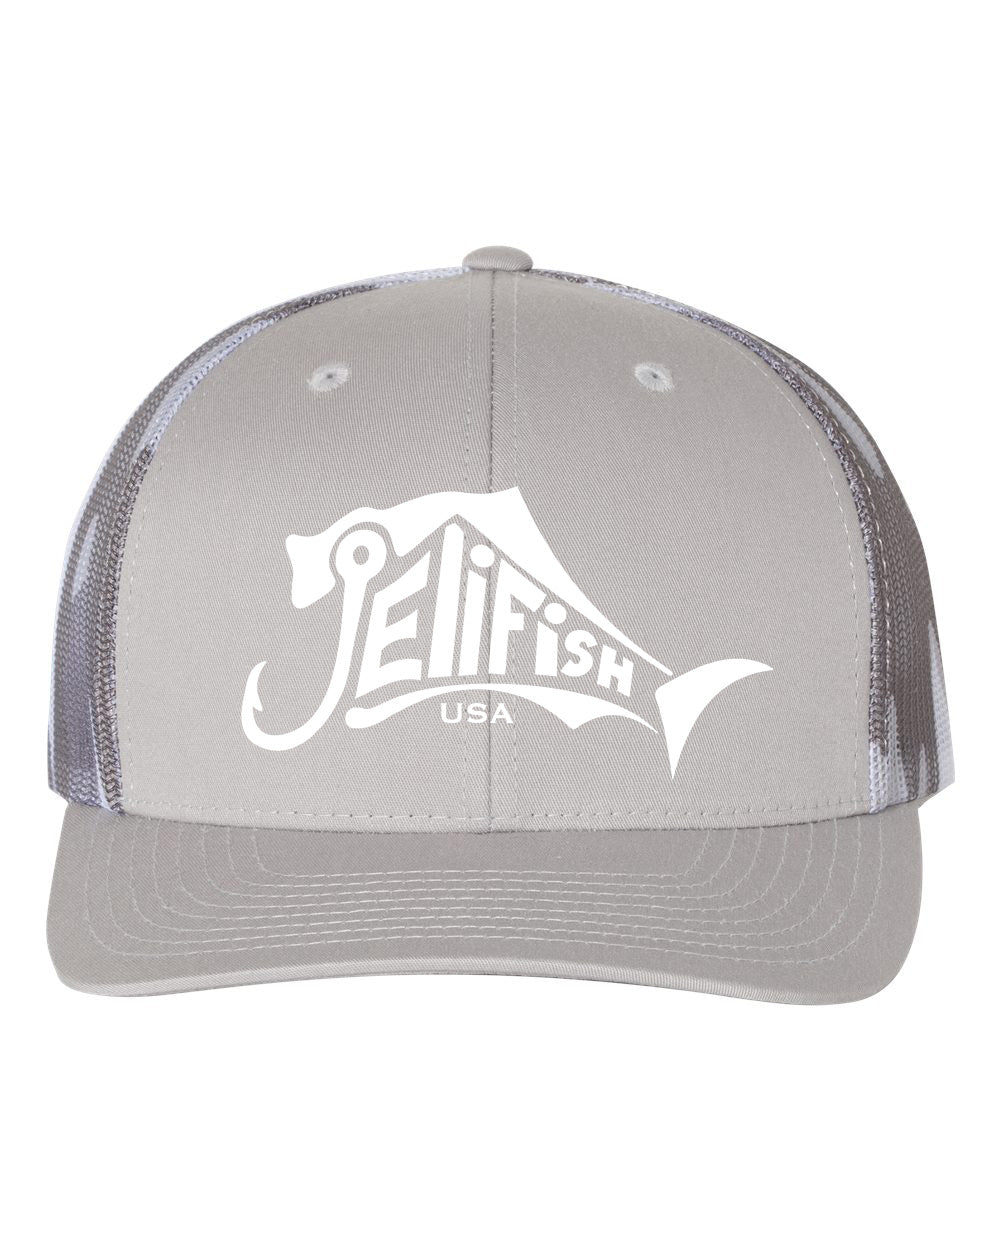 Jelifish USA Embroidered Richardson 112 Trucker Hat in Silver / Grey Camo